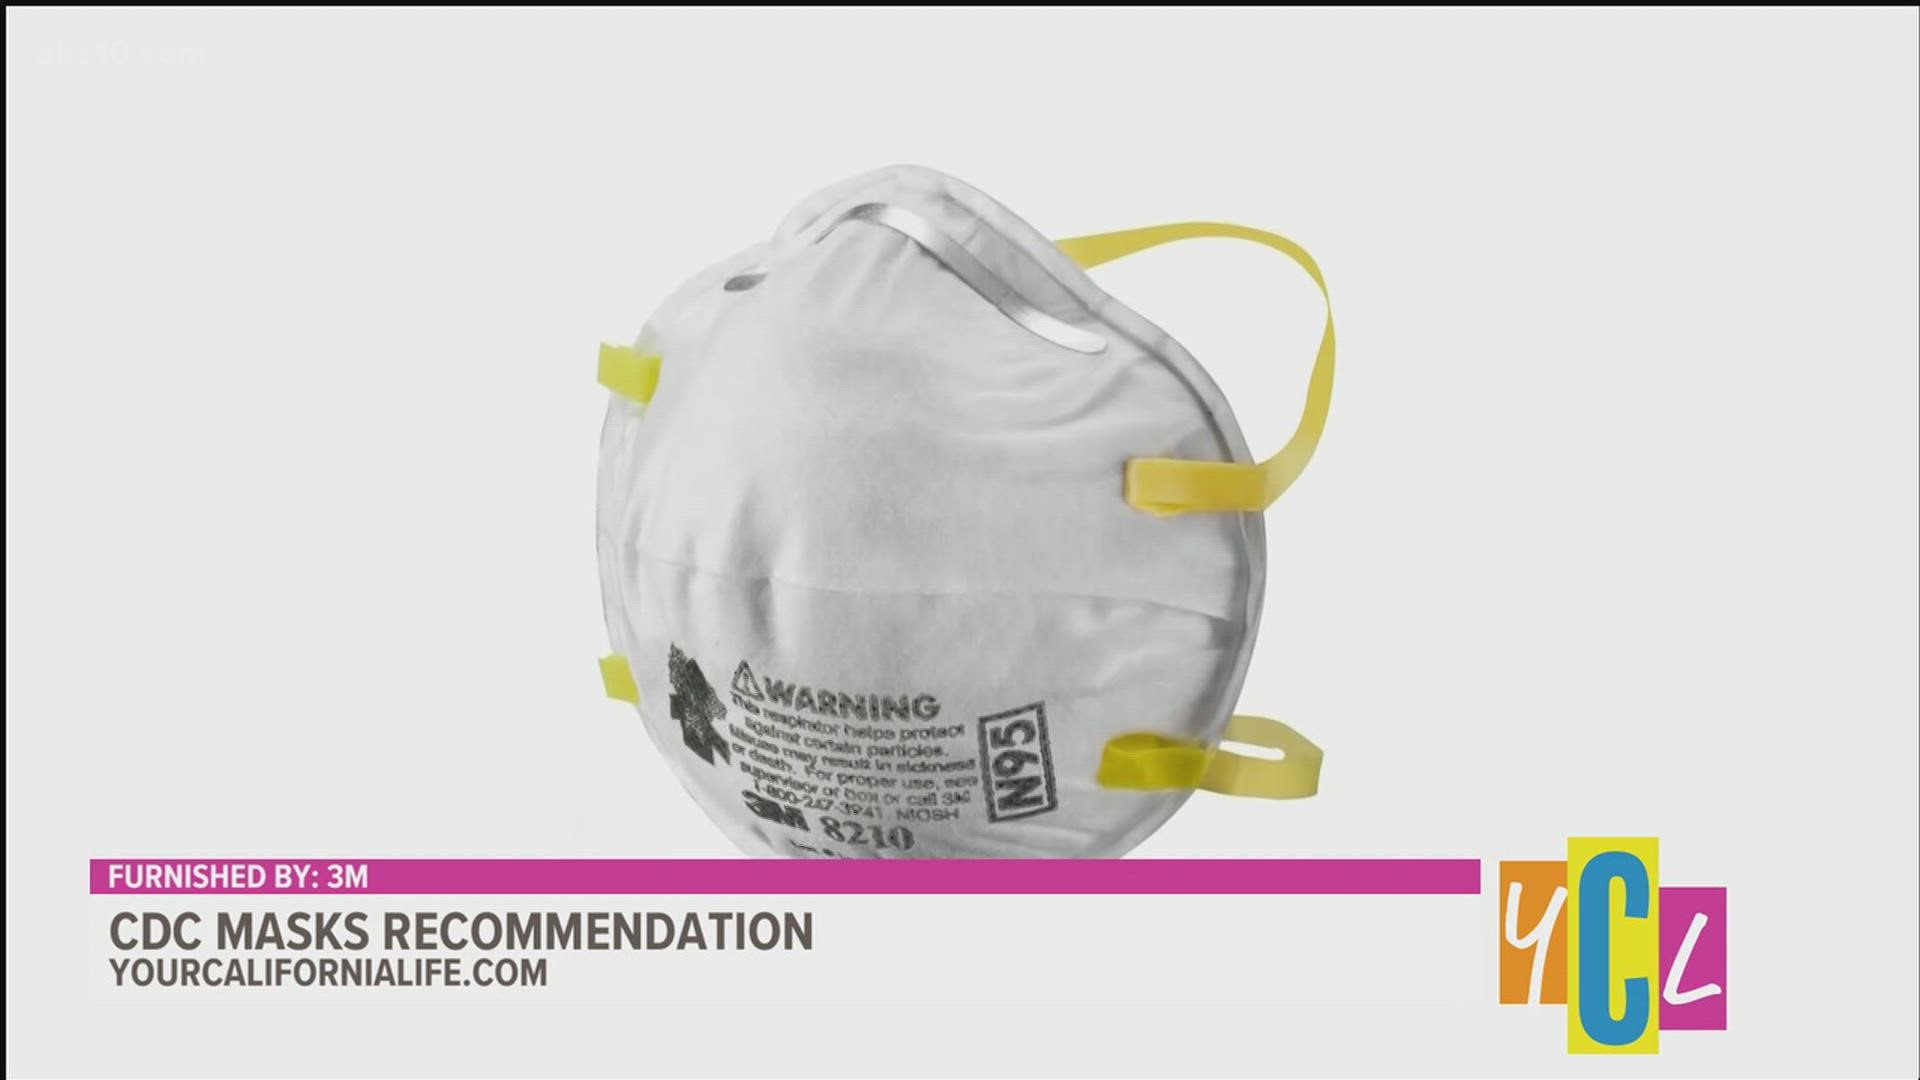 A mask expert discusses the science behind the new CDC recommendations that call for stronger protection when it comes to face coverings.